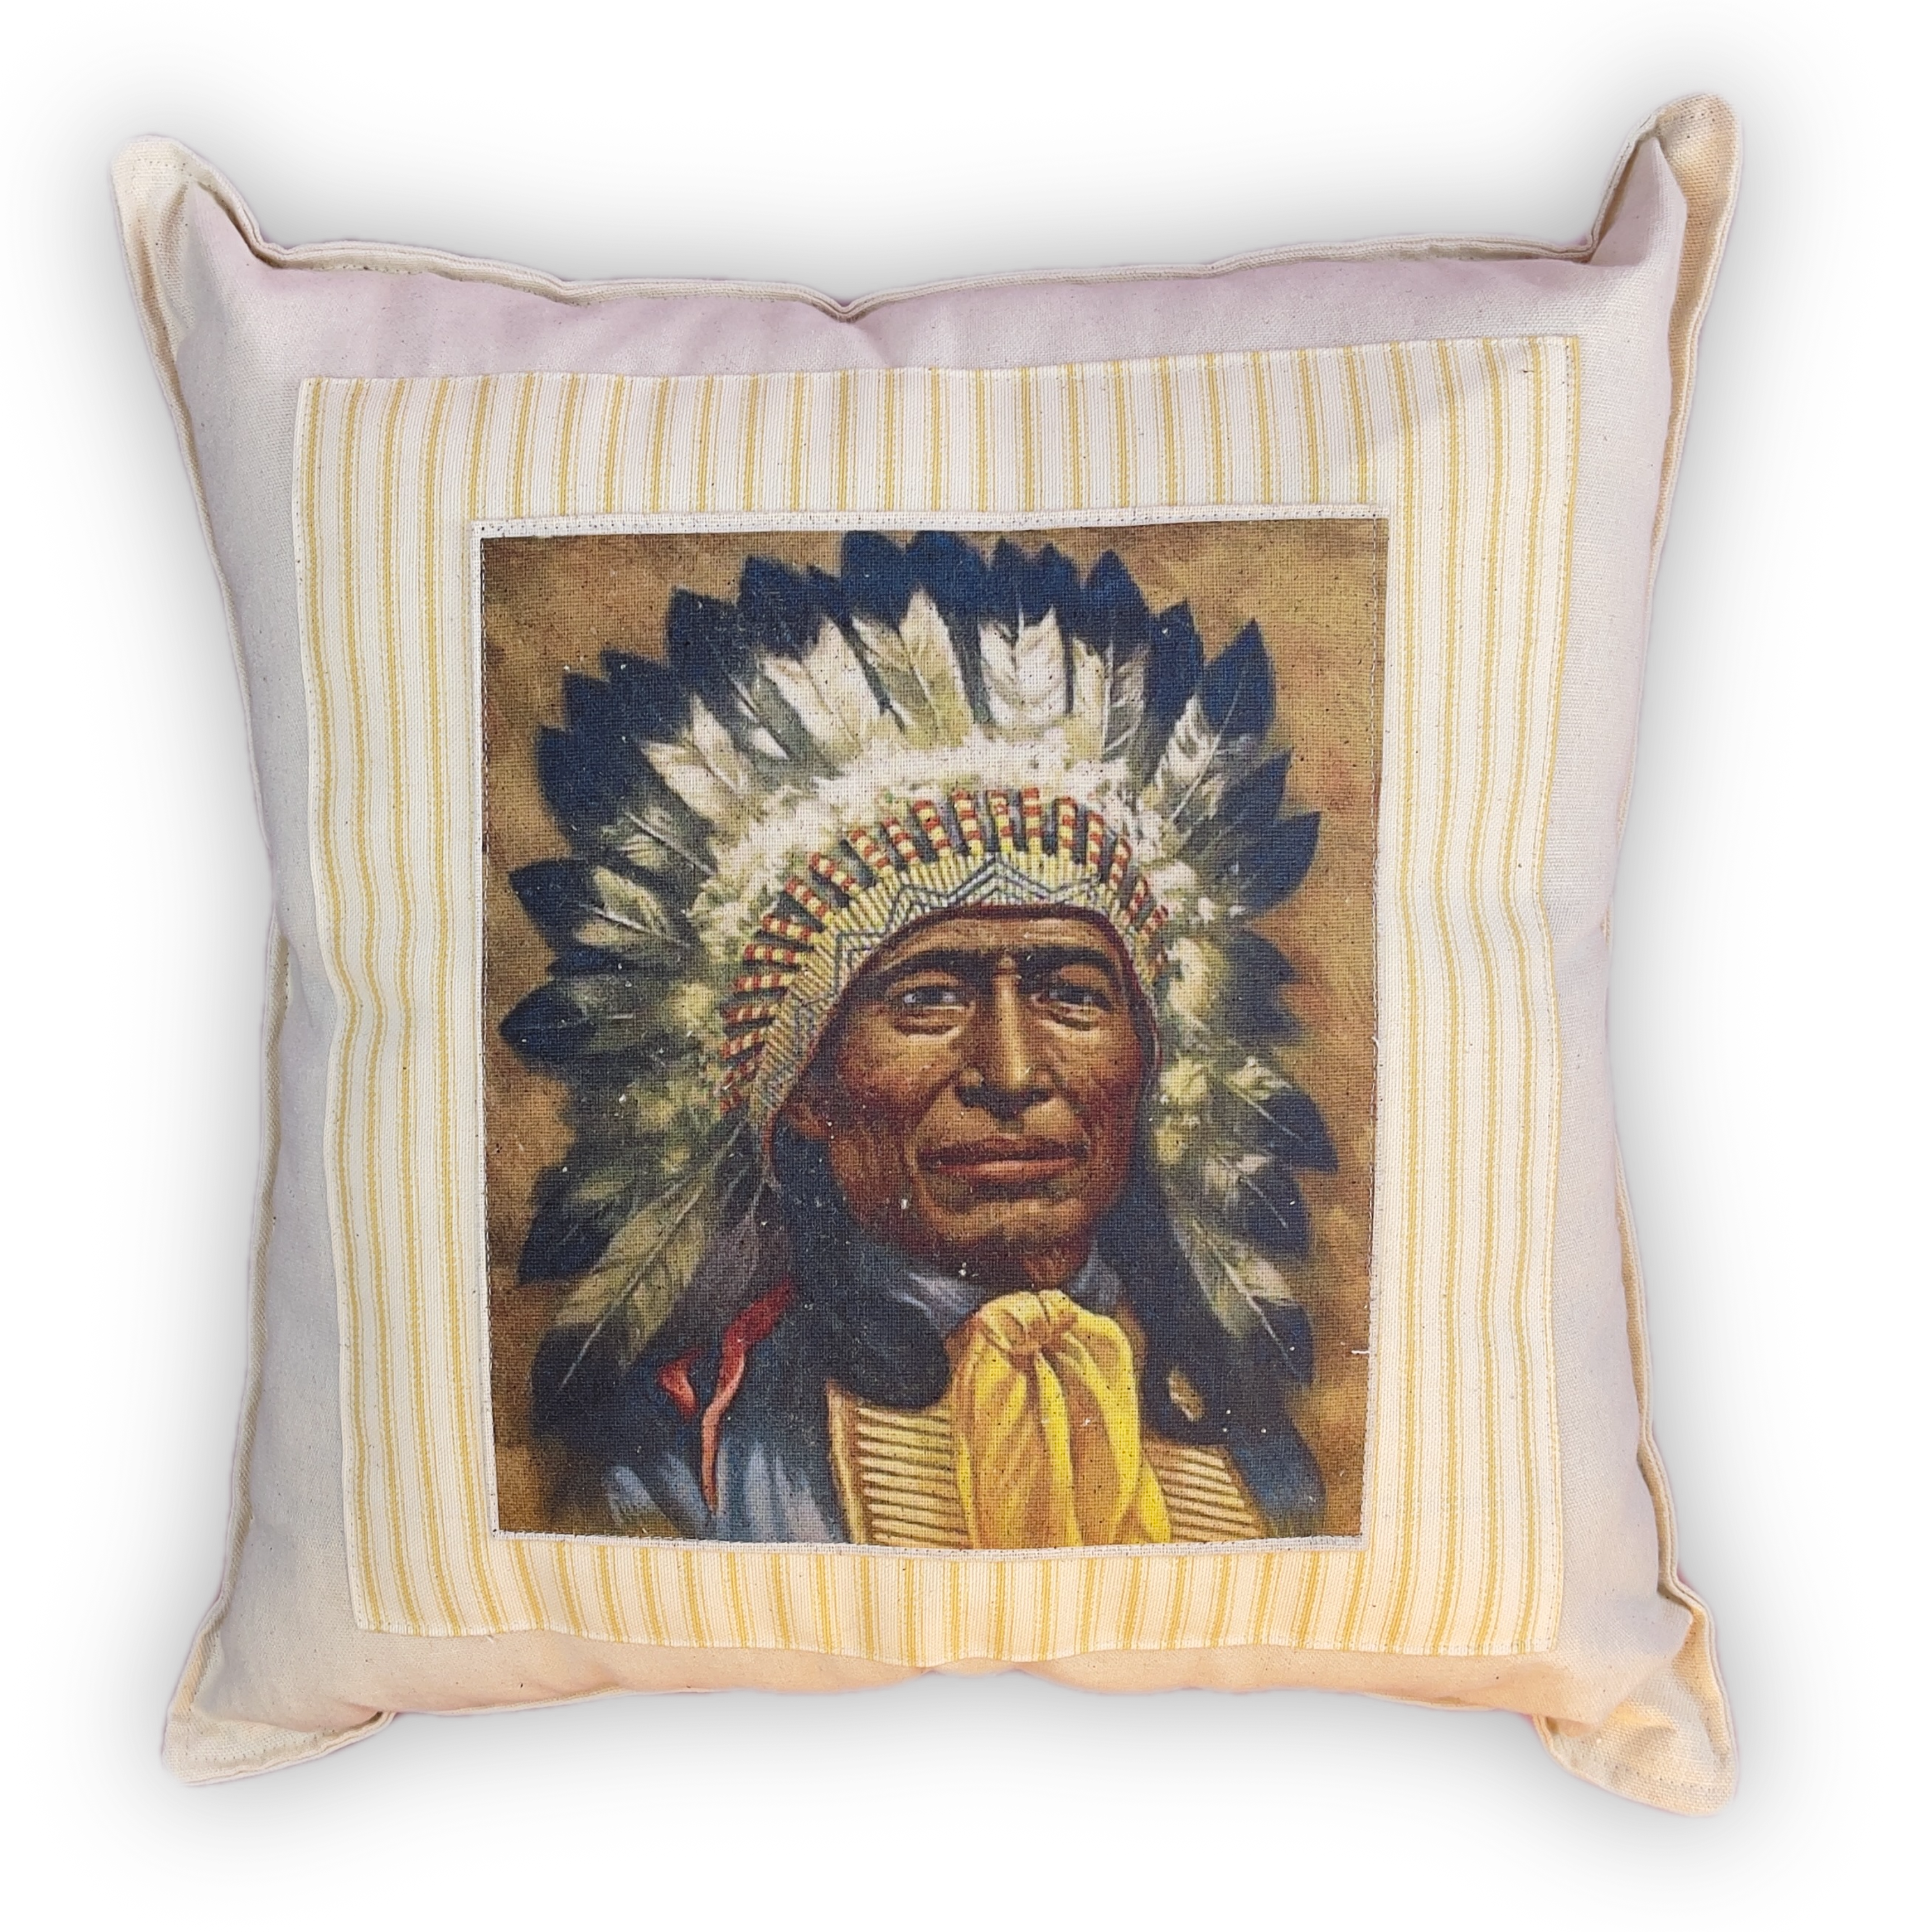 Traditional Native American Indian Pillow